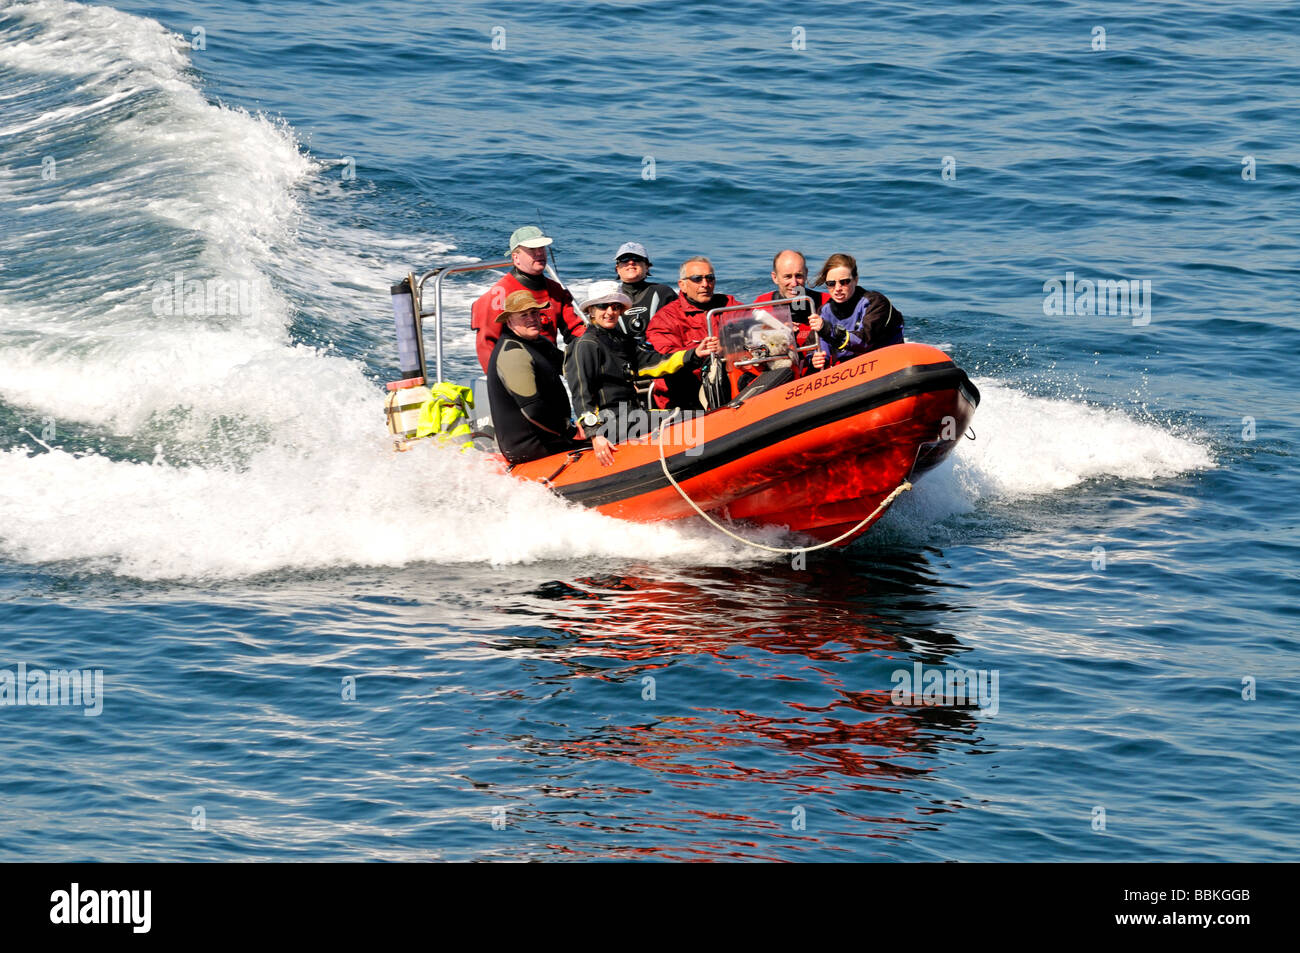 Orange RIB outboard motorboat filled with people speeding across water Stock Photo